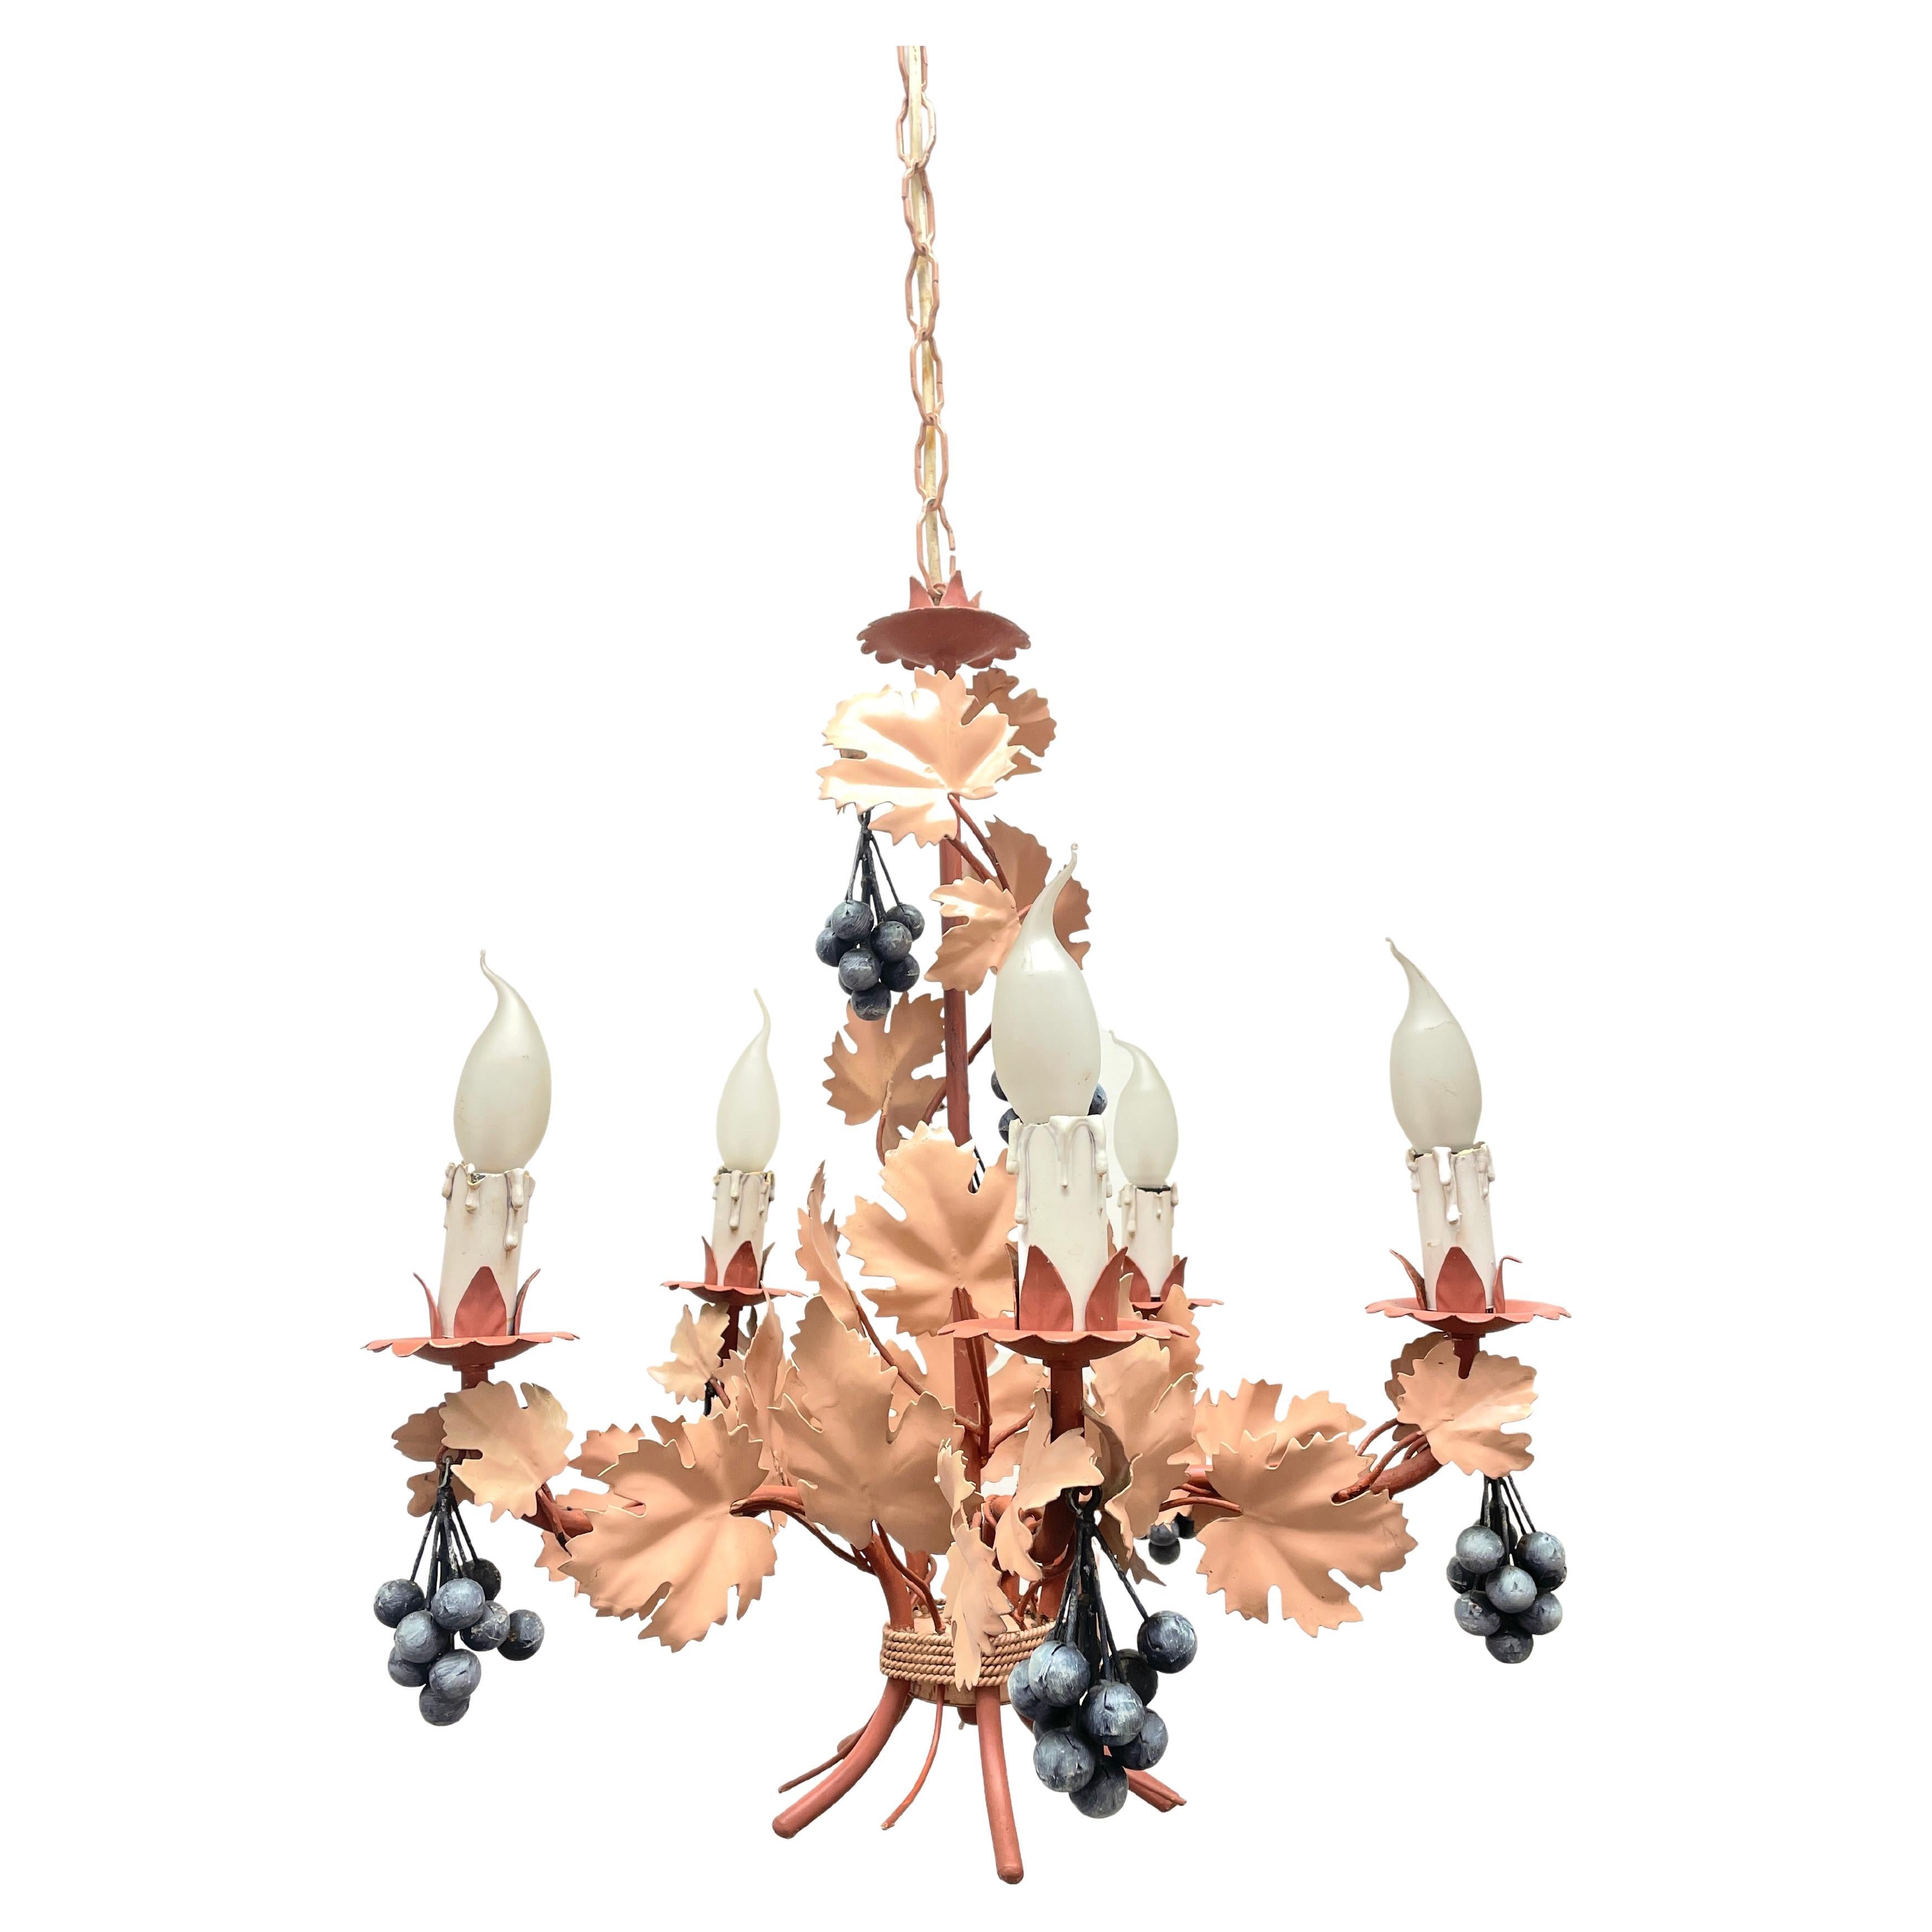 Beautiful Italian Tole Florentine Florence Dusky Pink with Grapes Chandelier